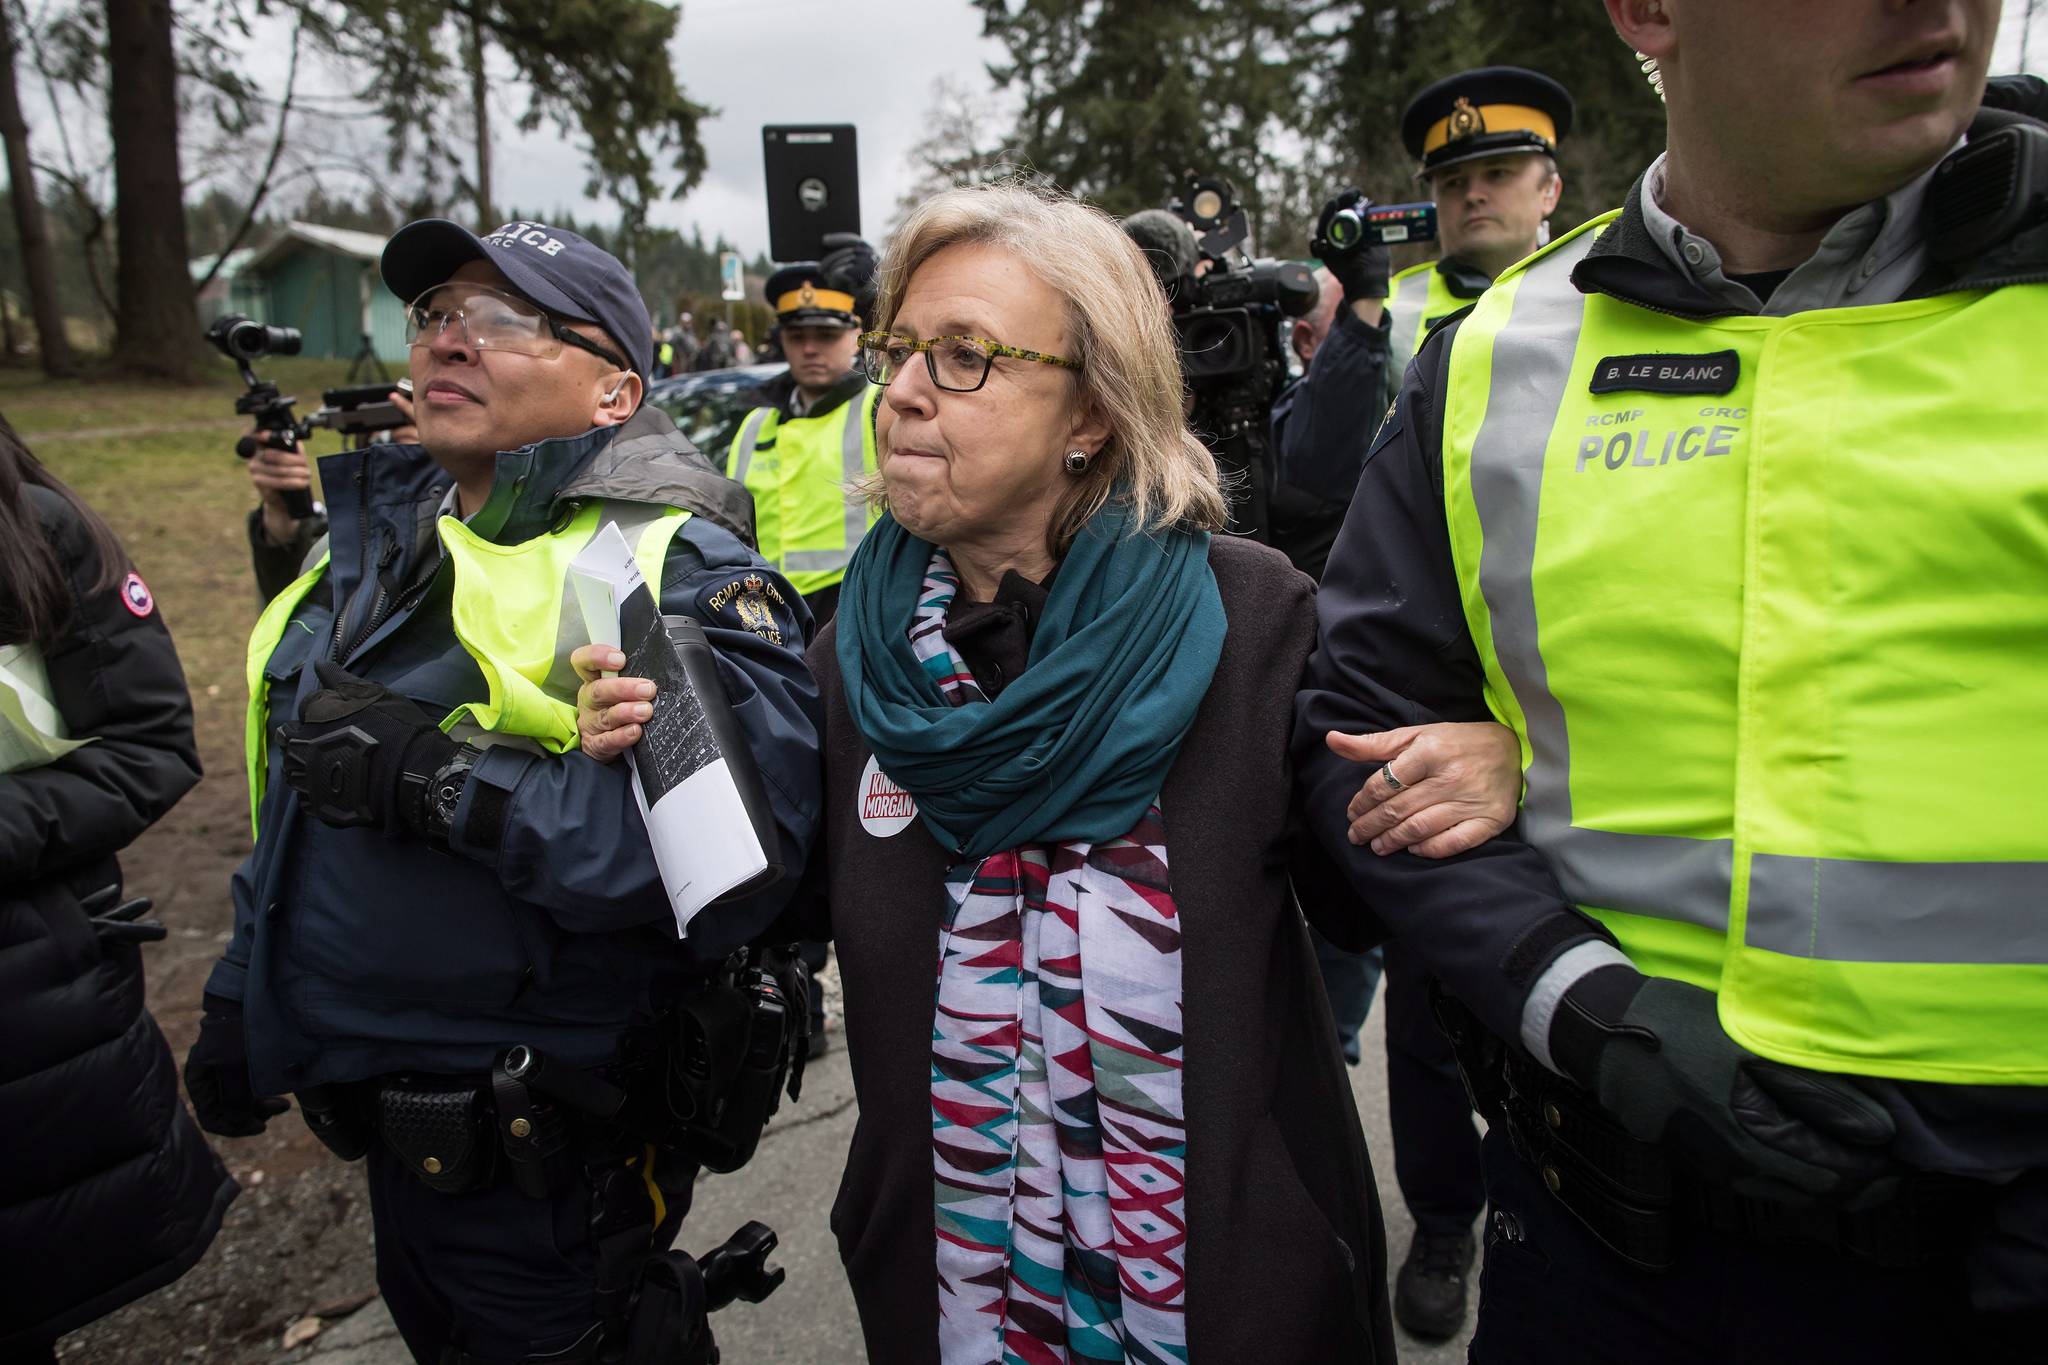 Federal Green Party Leader Elizabeth May, centre, is arrested by RCMP officers after joining protesters outside Kinder Morgan’s facility in Burnaby, B.C., on Friday March 23, 2018. (Darryl Dyck/The Canadian Press)